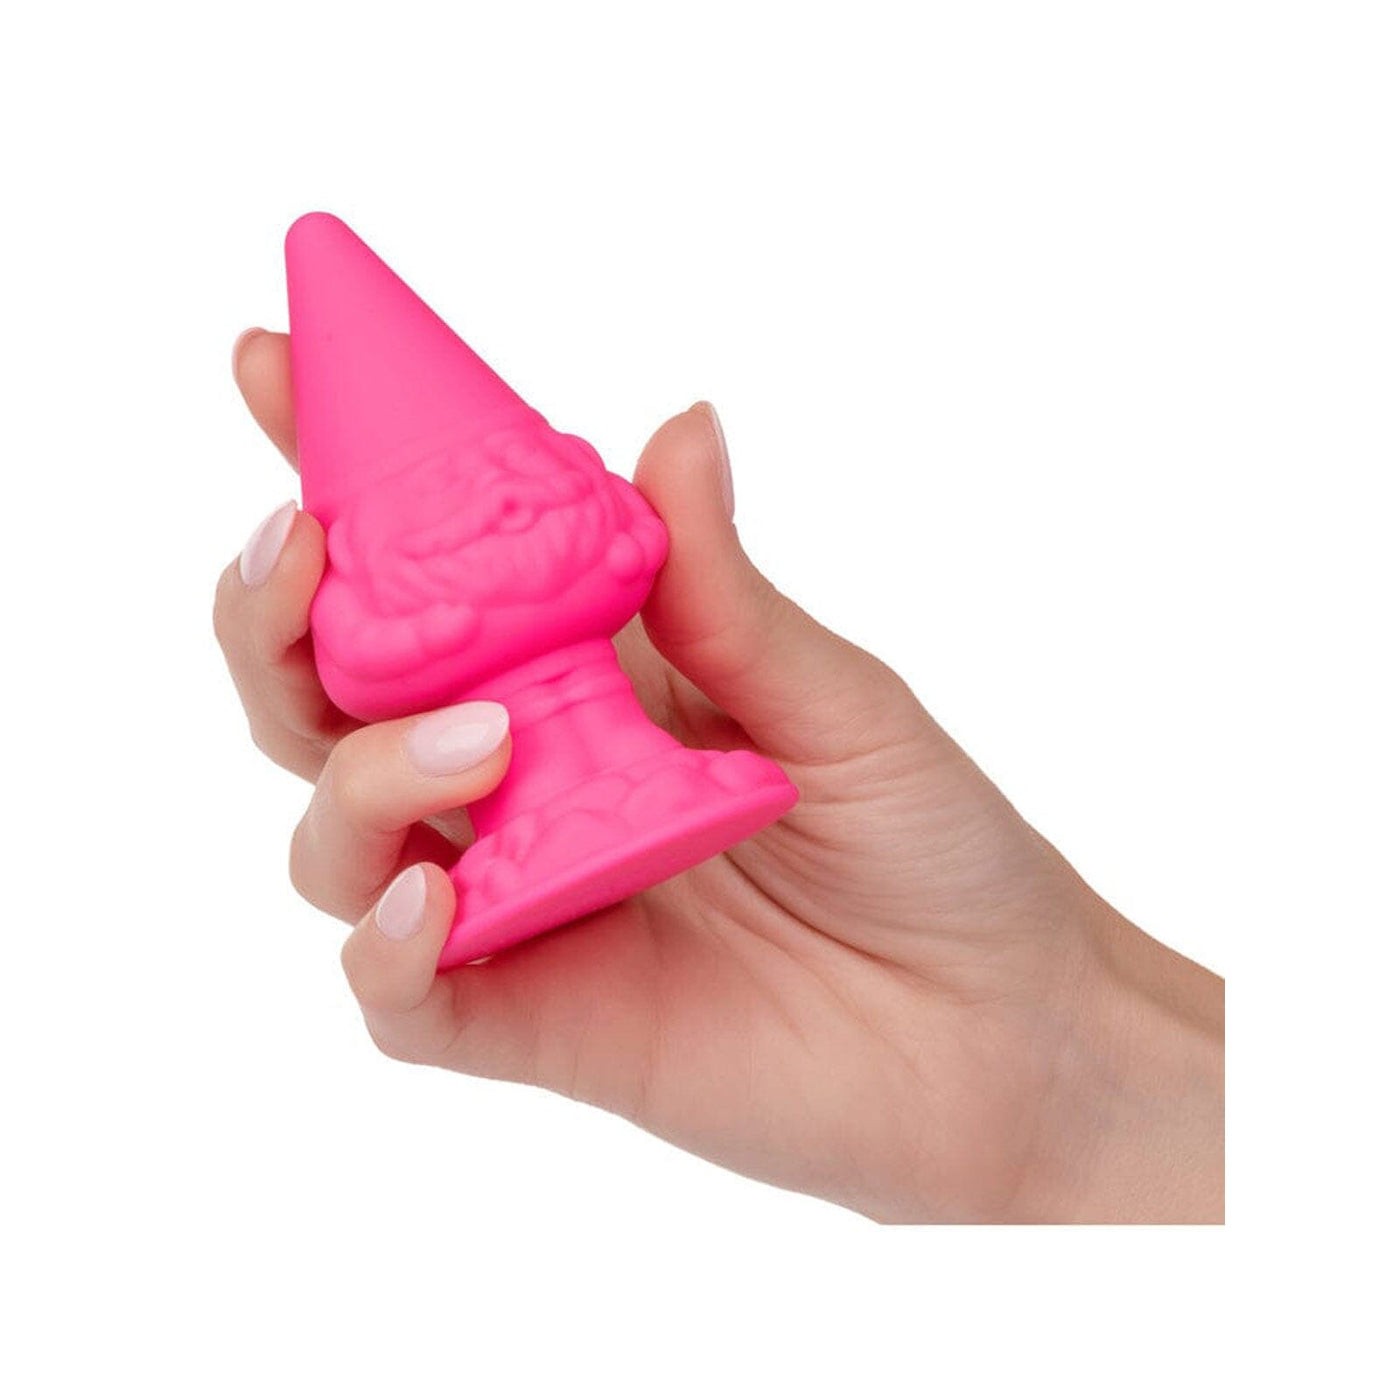 Naughty Bits Silicone Anal Gnome Butt Plug